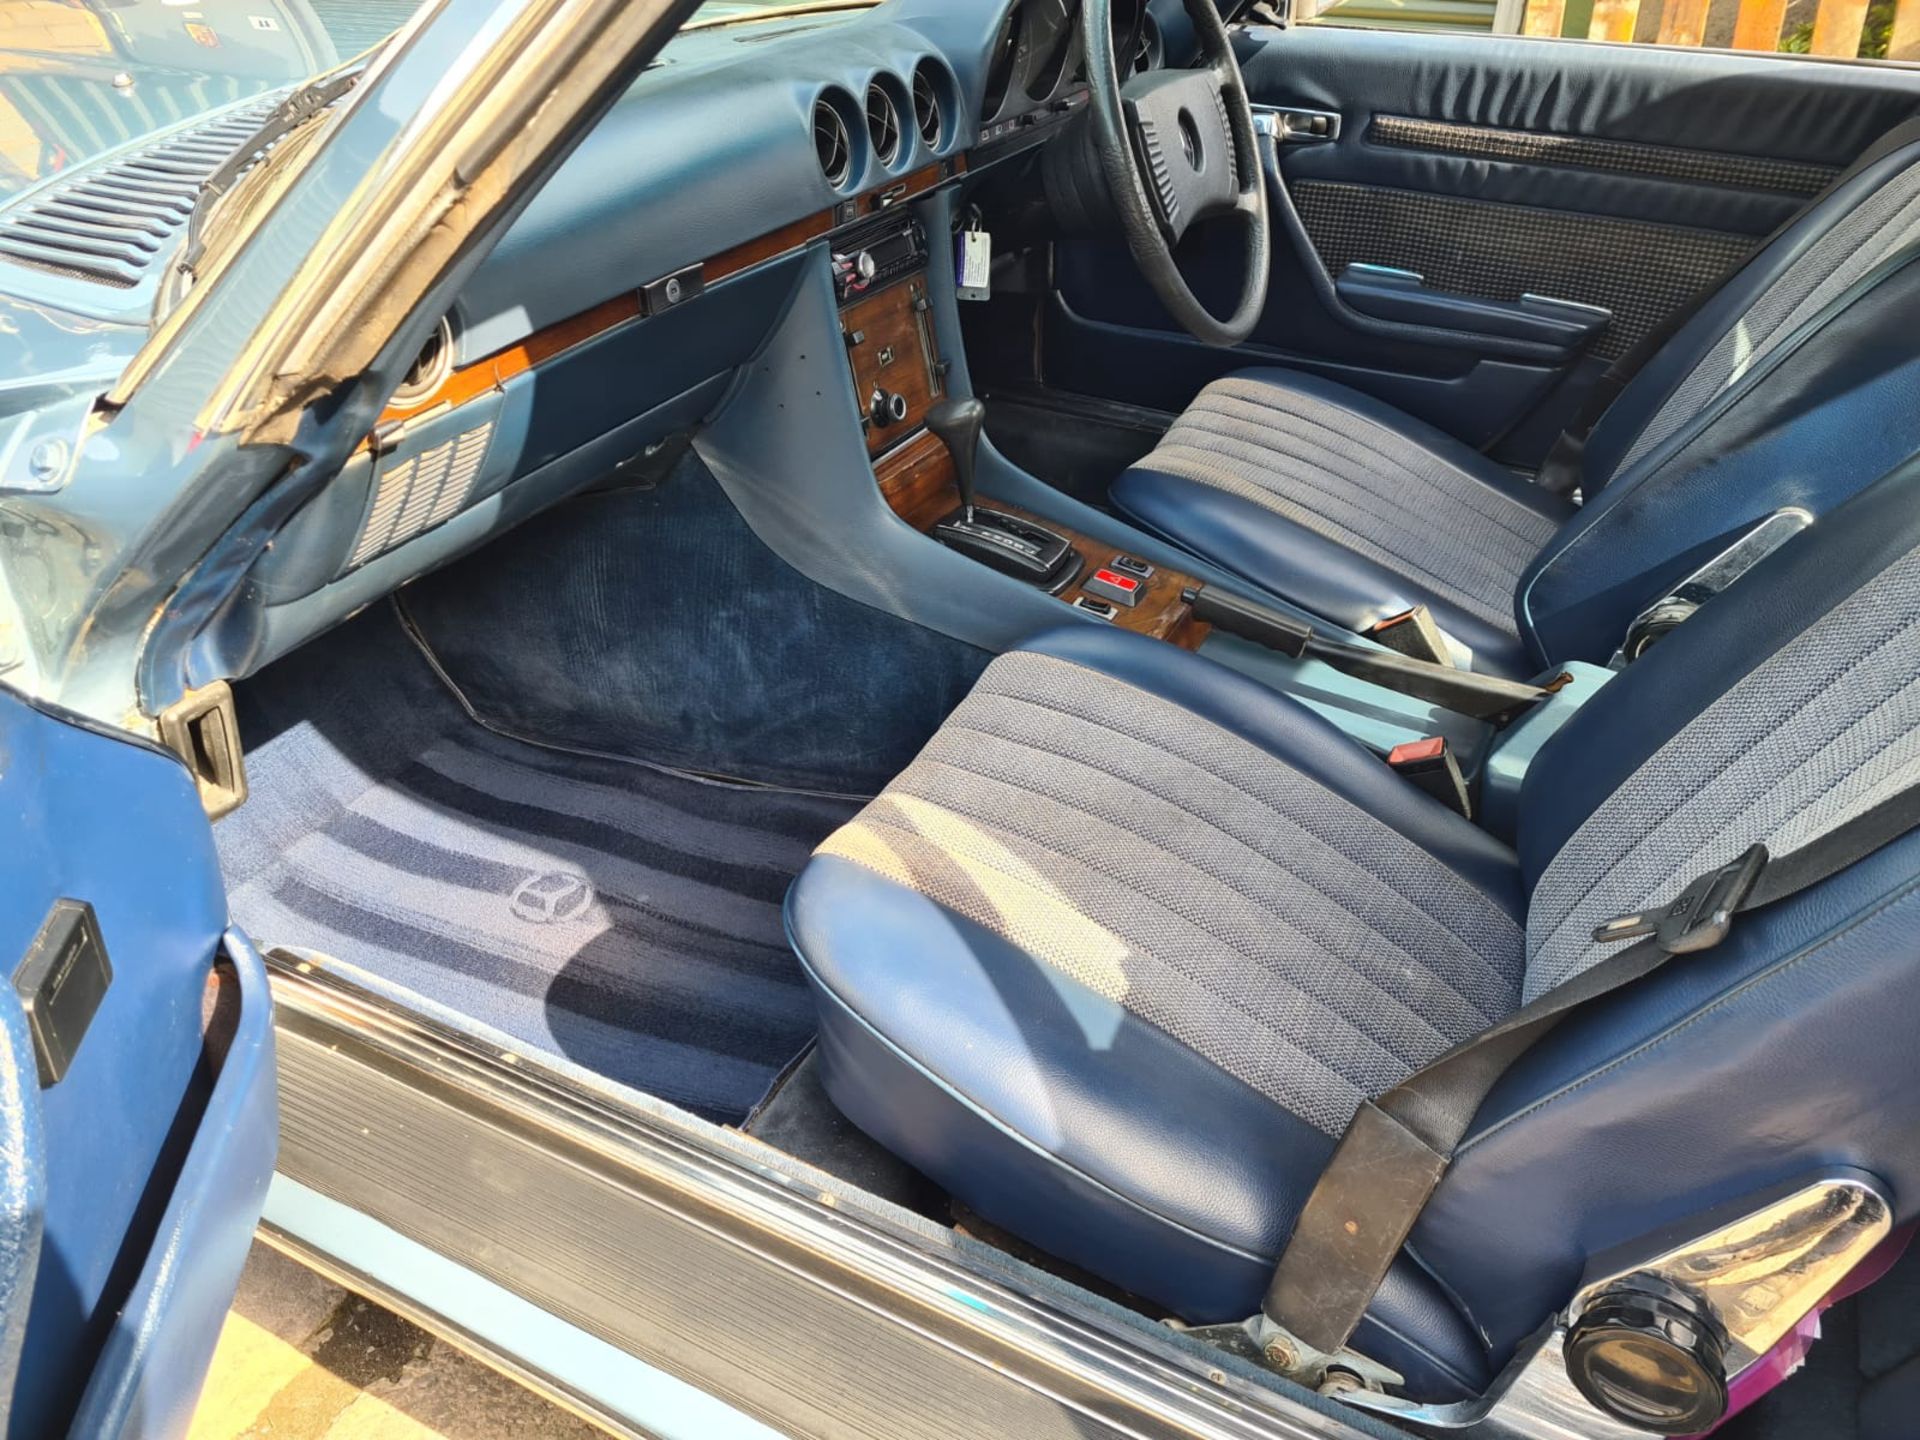 Stunning 1979 Mercedes Benz SL350 V8 With Factory Hardtop - Restored in 2018 - Image 10 of 22